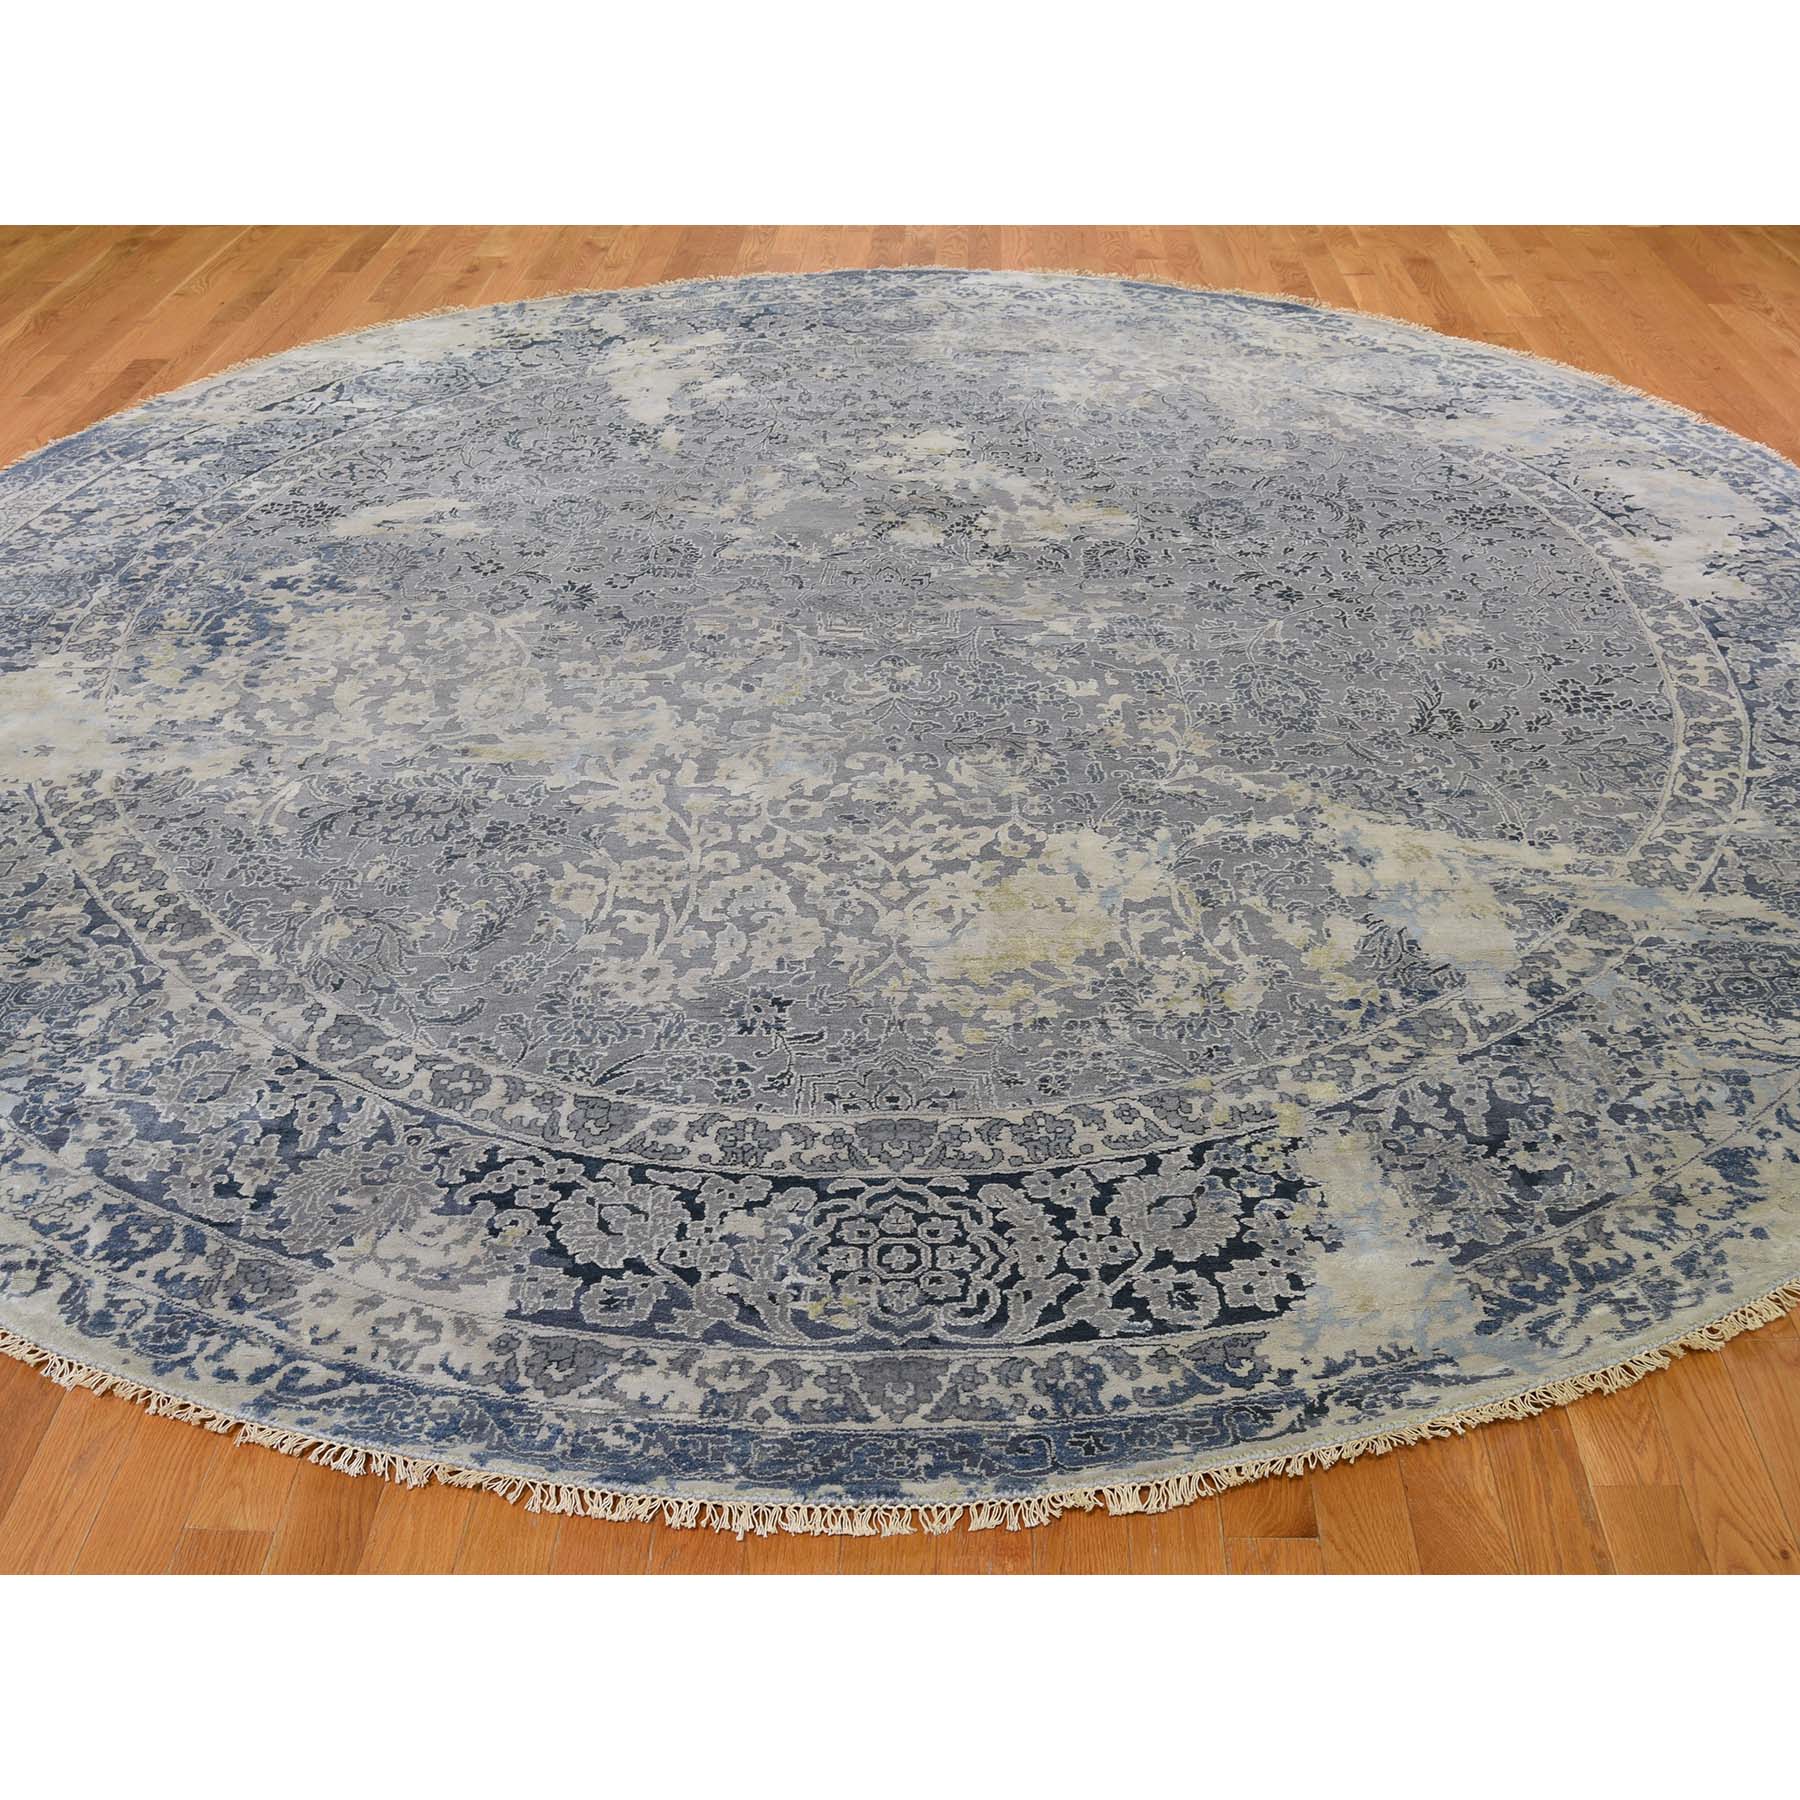 11-10 x11-10  Round Broken Persian Design With Pure Silk Hand-Knotted Oriental Rug 